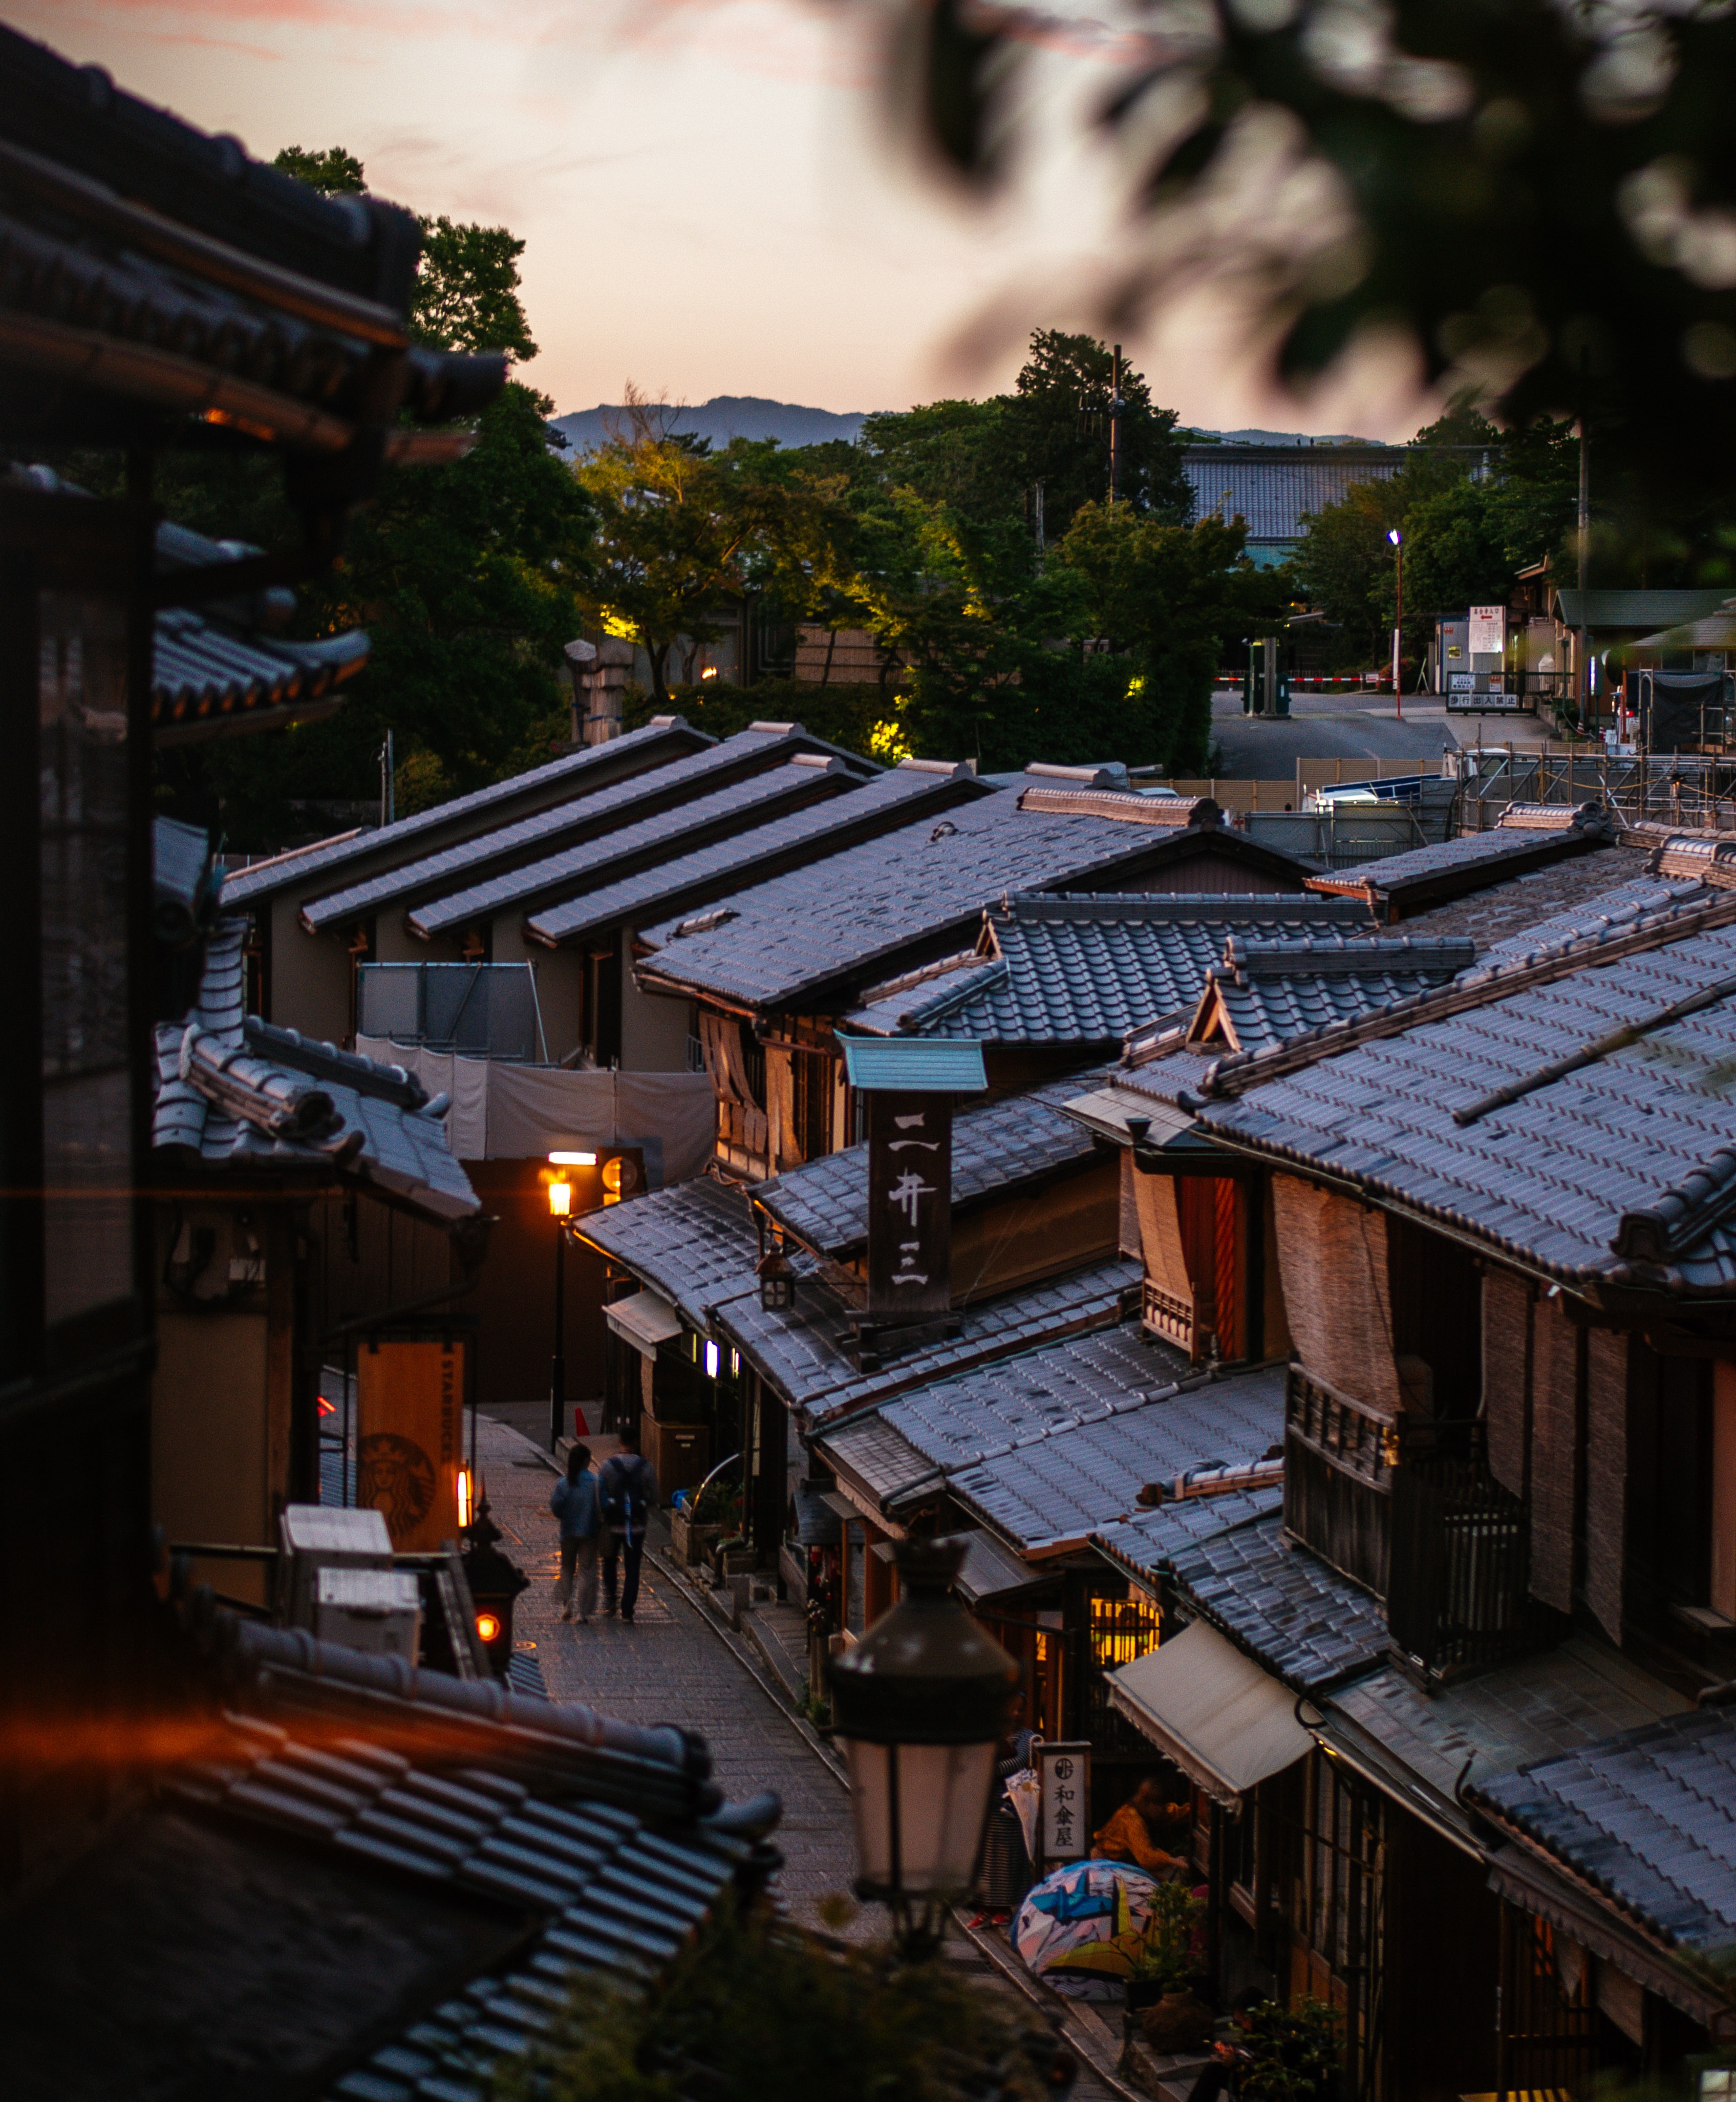 Sunset view of the streets in the Gion district from Kyoto highlighting the Japanese architecture. Photo by Cosmin Serban, Unsplash.